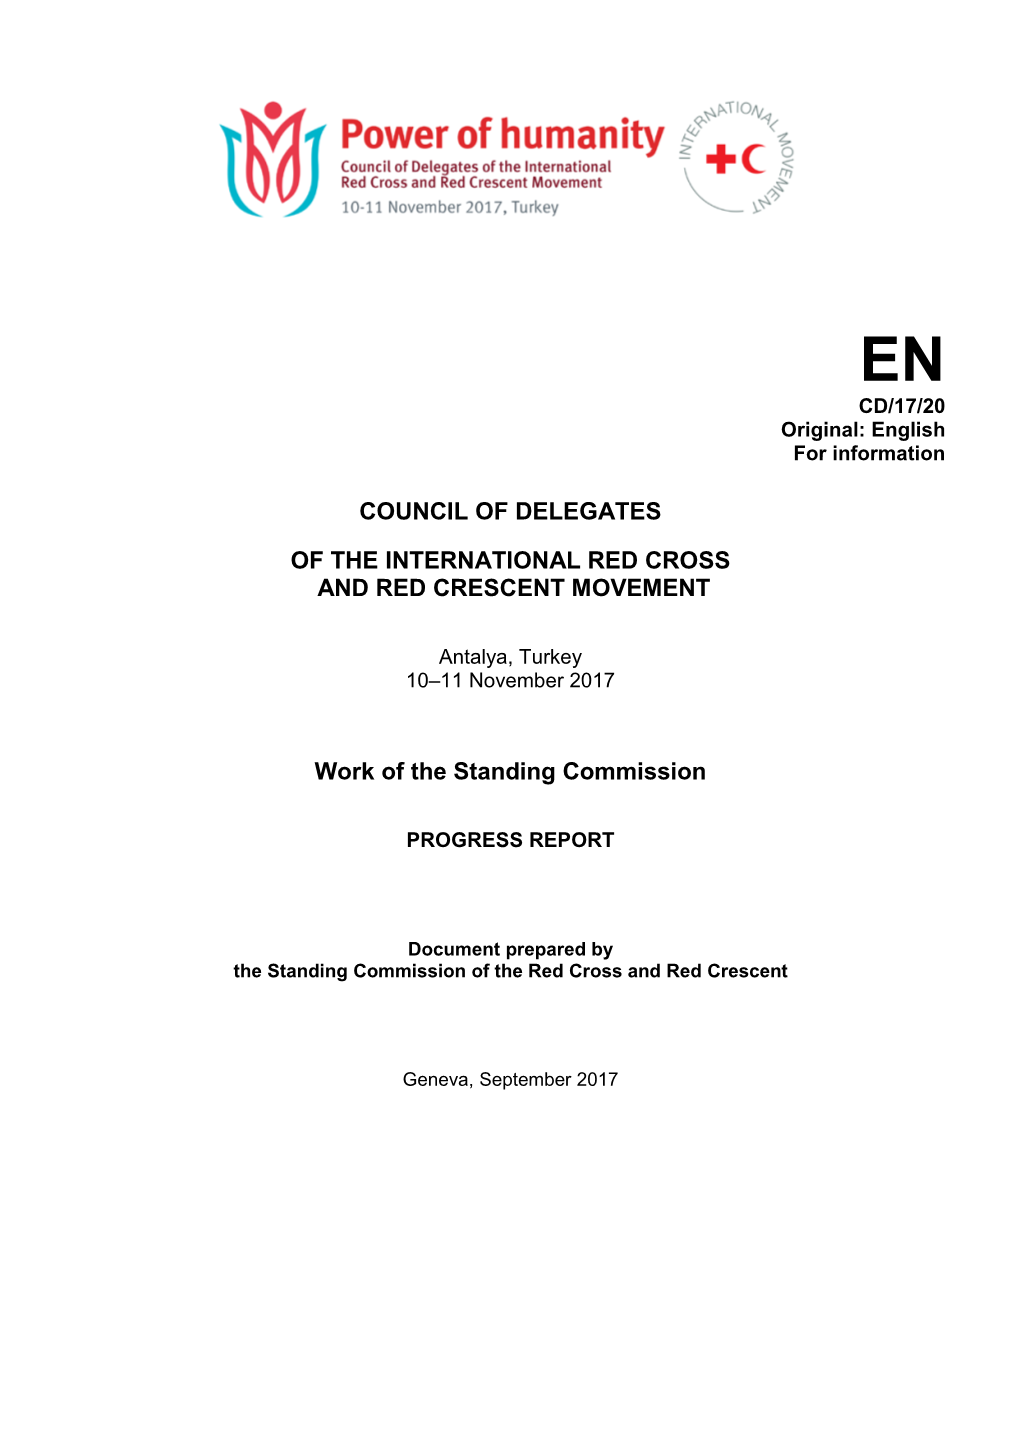 Report on the Work of the Standing Commission